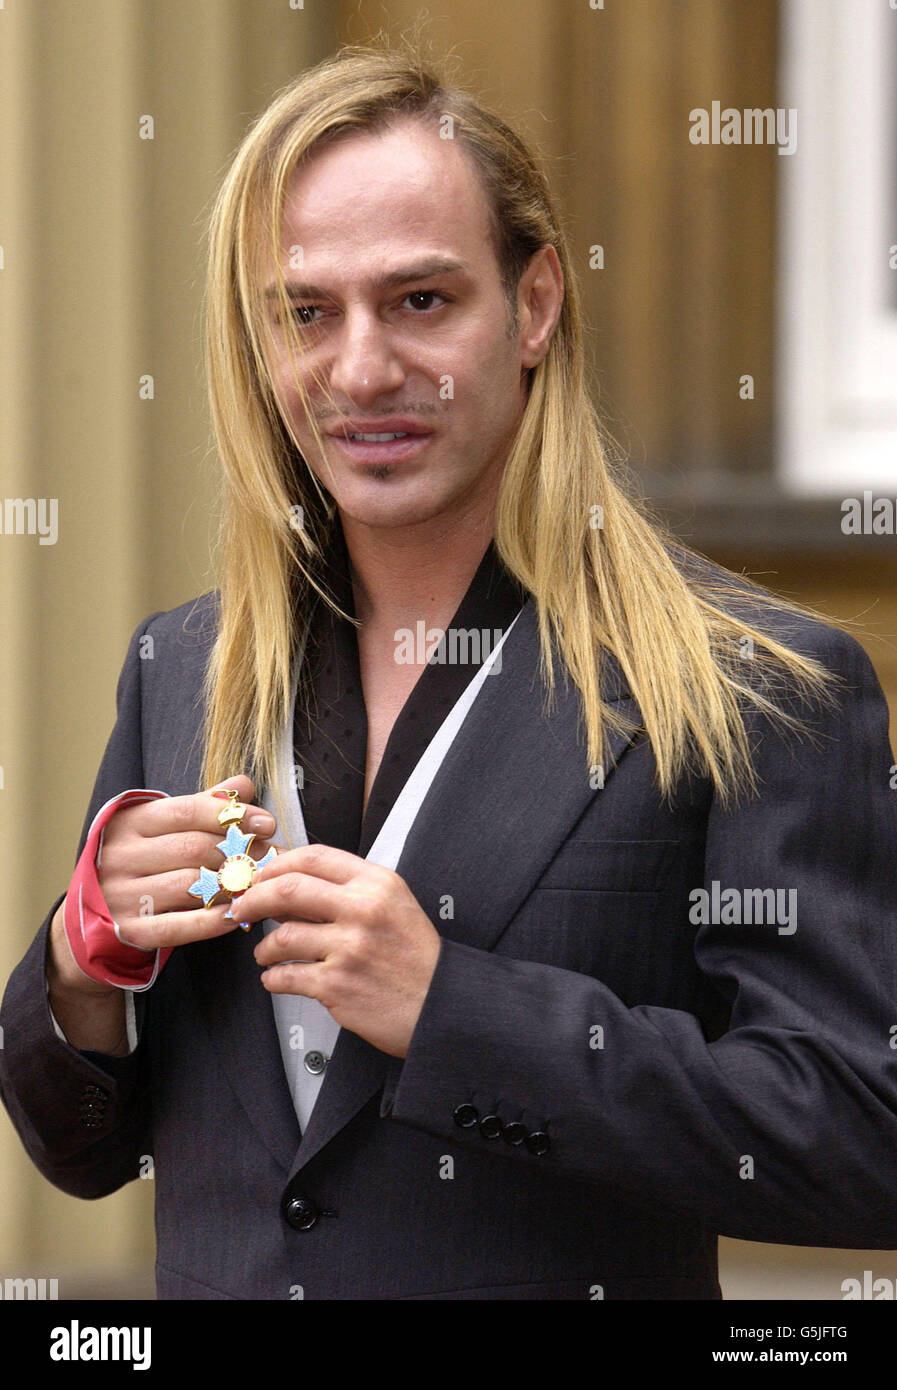 British fashion designer for Dior, John Galliano poses for photographs  after receiving an CBE from Queen Elizabeth II at Buckingham Palace,  London. He said it was one of the greatest honours he'd